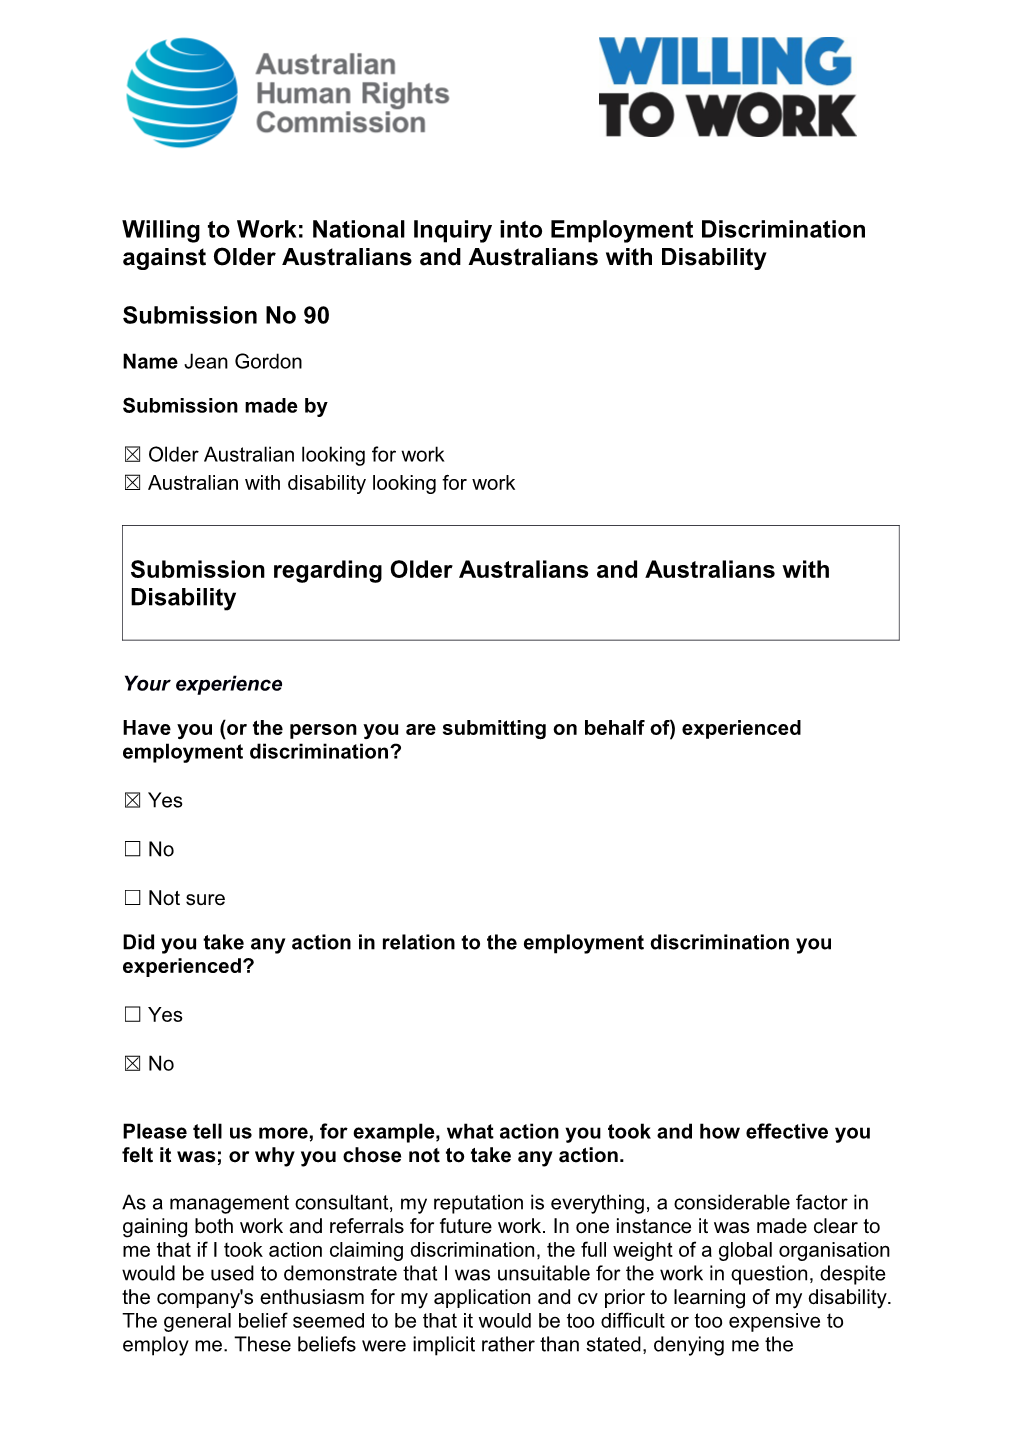 Willing to Work: National Inquiry Into Employment Discrimination Against Older Australians s9